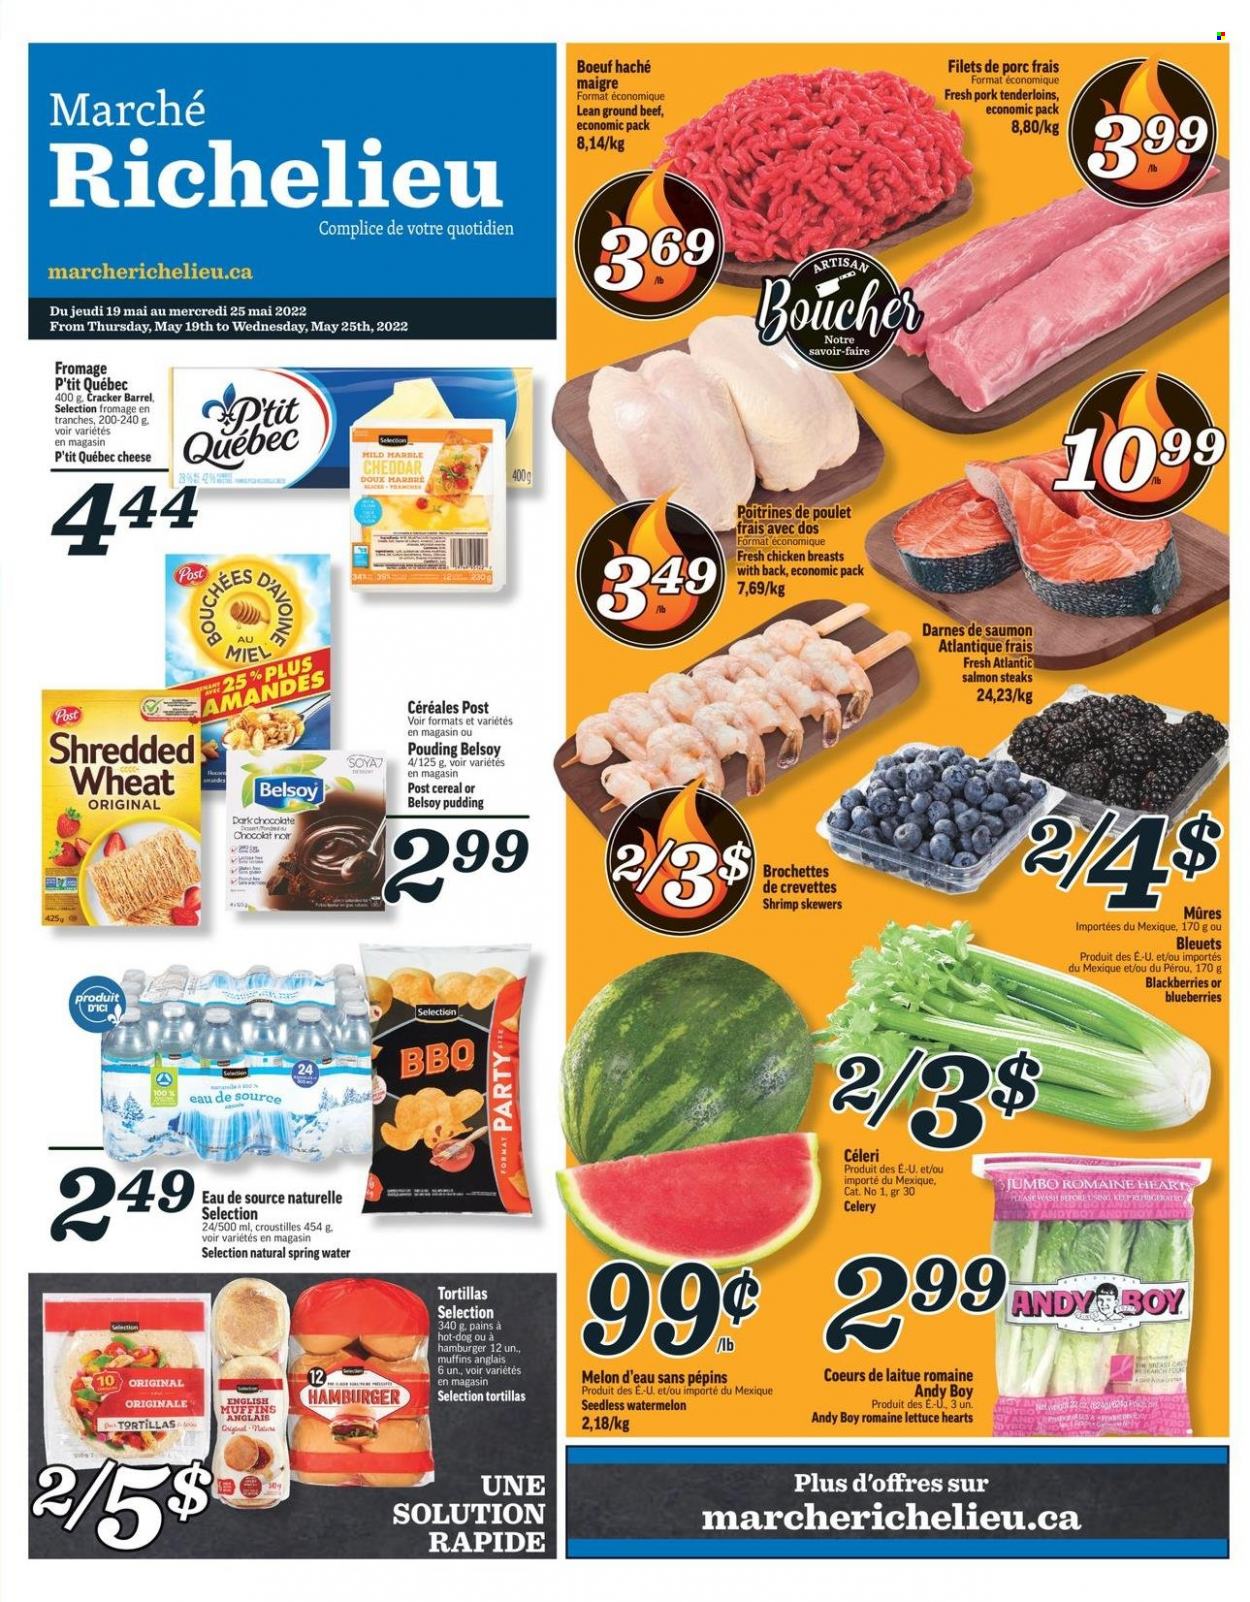 thumbnail - Marché Richelieu Flyer - May 19, 2022 - May 25, 2022 - Sales products - english muffins, tortillas, celery, lettuce, blackberries, blueberries, watermelon, melons, salmon, shrimps, hamburger, cheddar, cheese, pudding, chocolate, crackers, dark chocolate, cereals, spring water, Richelieu, chicken breasts, beef meat, ground beef, pork tenderloin, steak. Page 1.